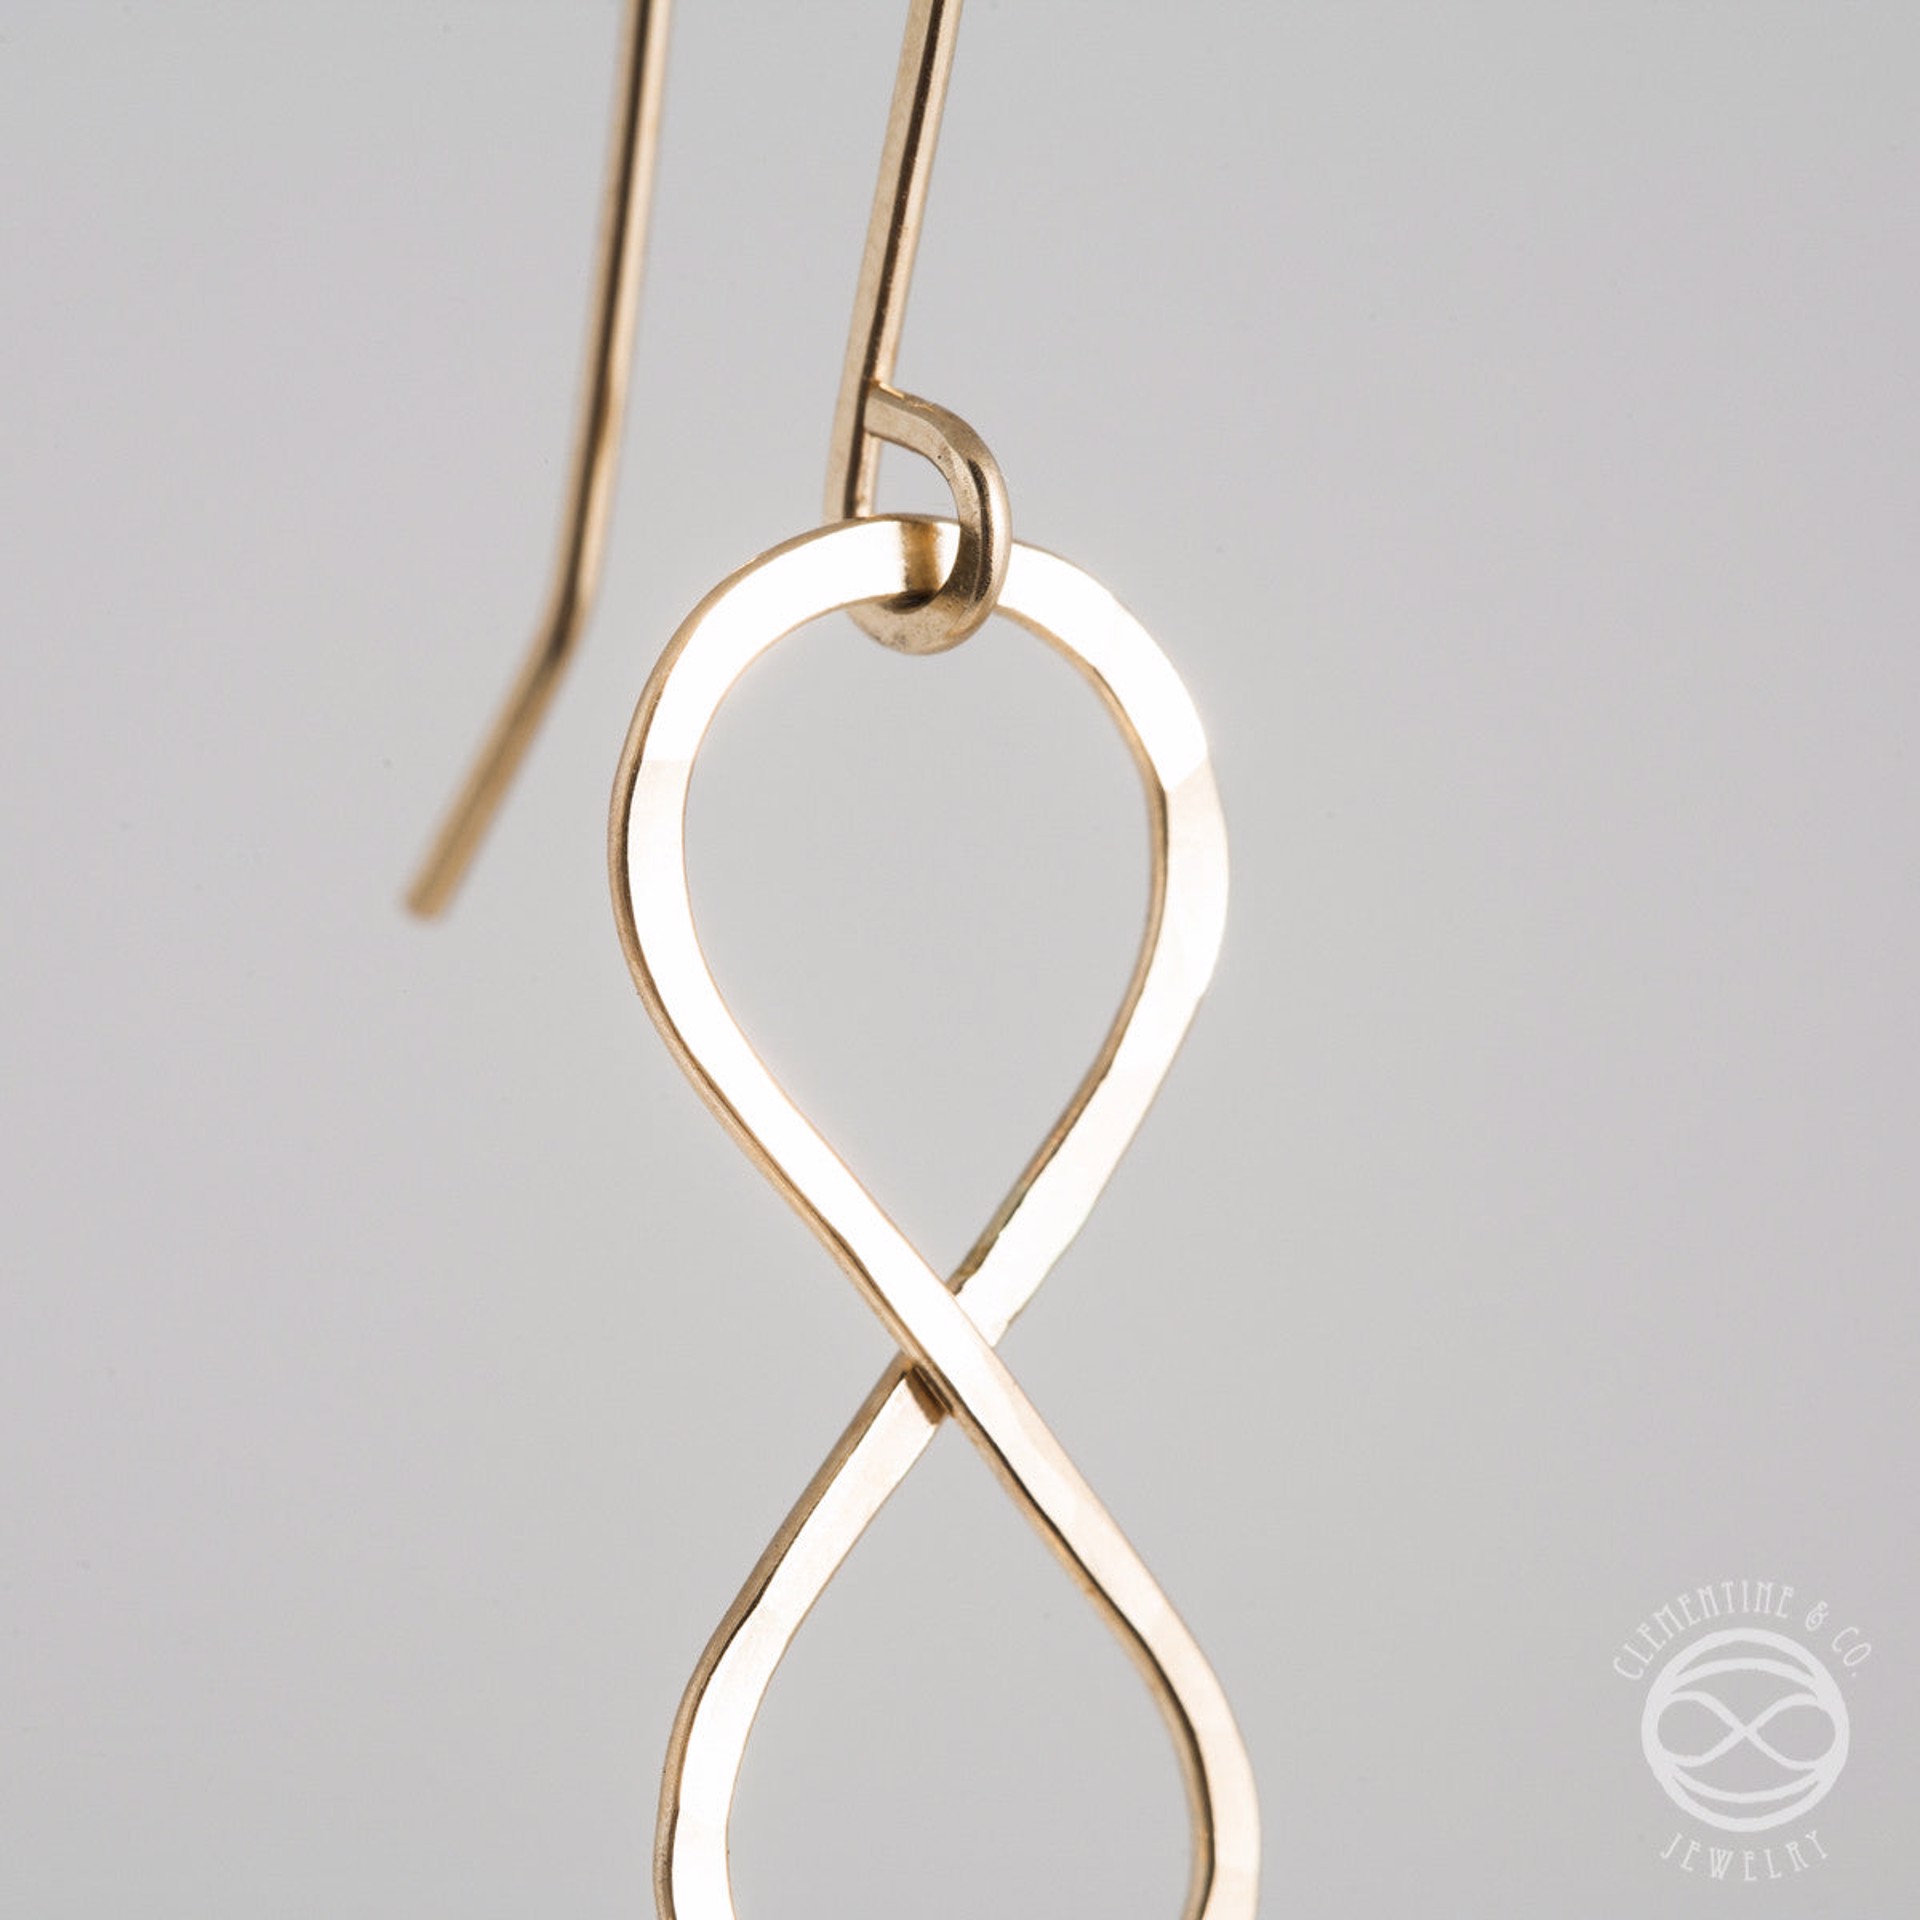 Infinity Earrings in Gold by Clementine & Co. Jewelry